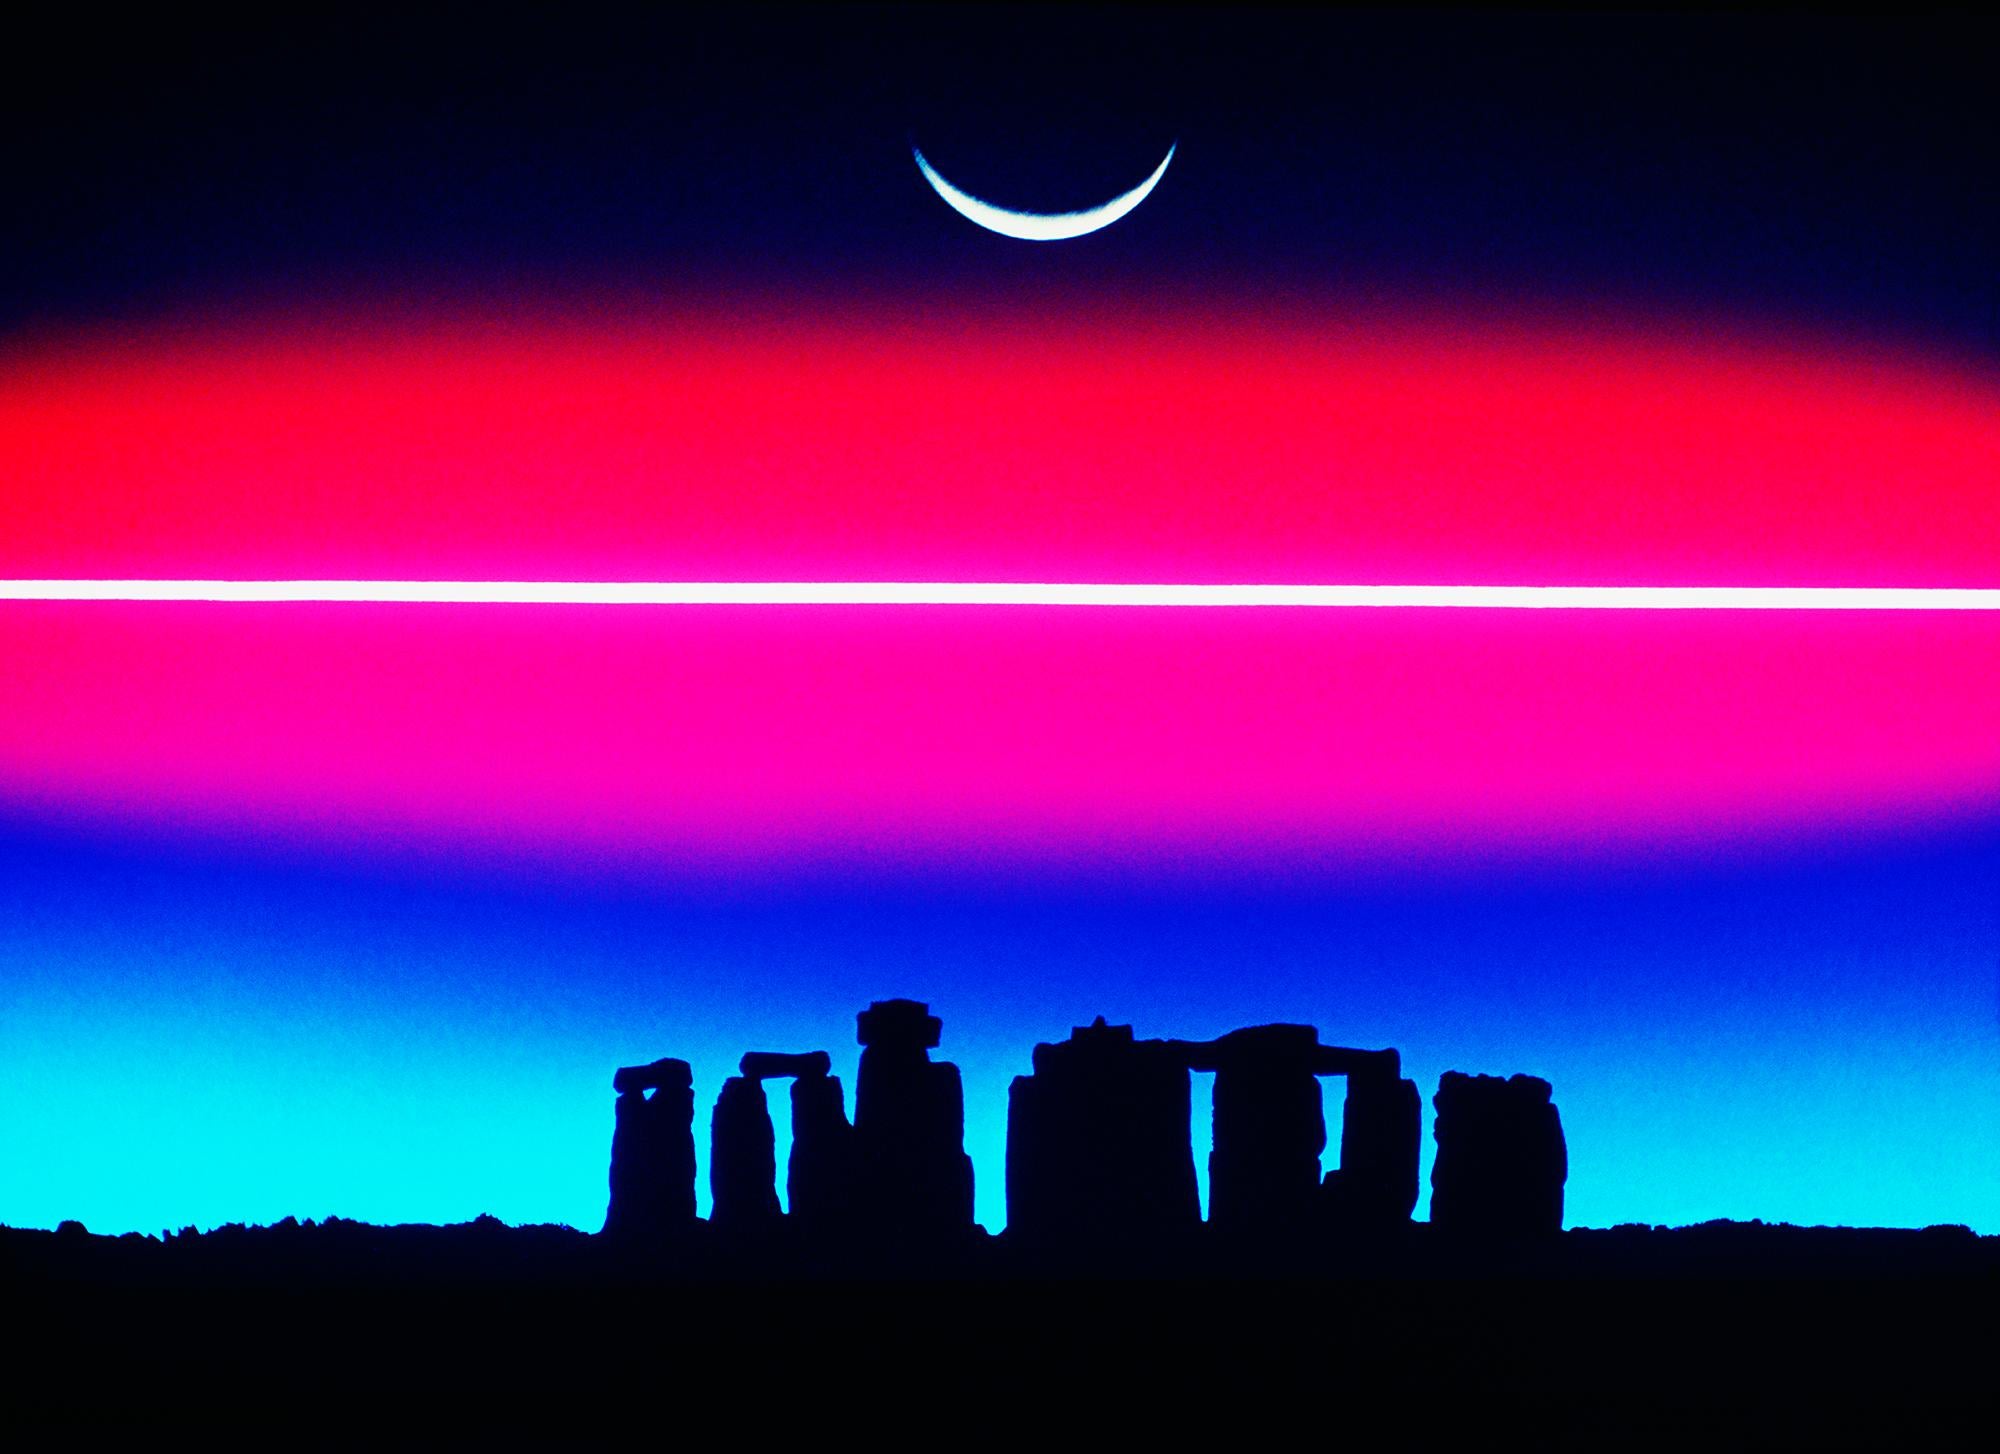 Mitchell Funk Abstract Photograph - Stonehenge and Eclipse with Pink Sci-Fi Glow